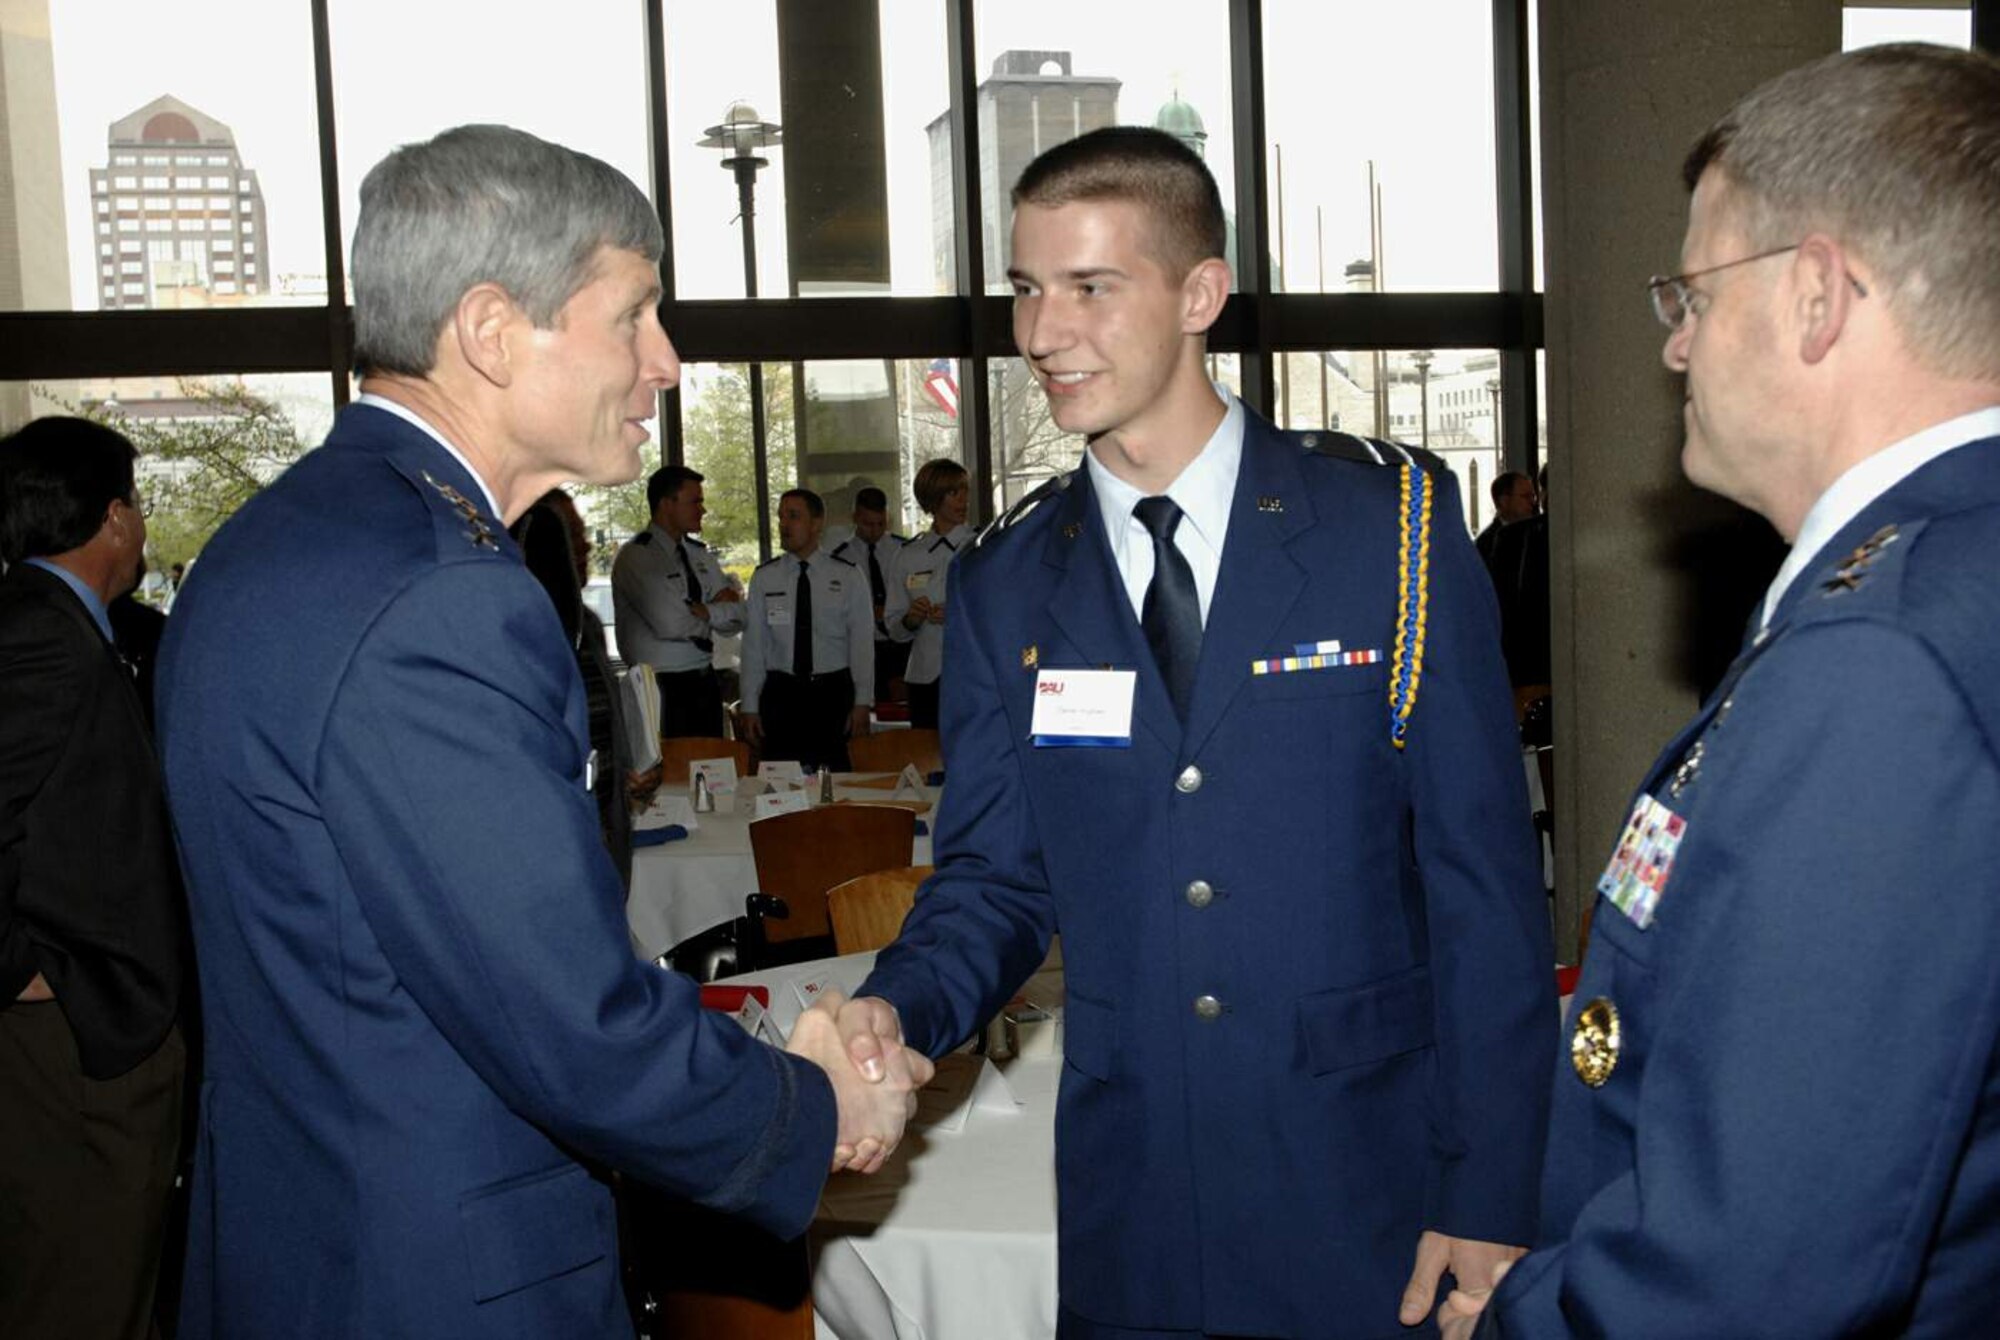 Gen. Norton Schwartz, Air Force chief of staff, congratulates University of Dayton Air Force ROTC Cadet 3rd Class Daniel Hughes on his decision to pursue a career as an Air Force officer, while Lt. Gen. Mark Shackelford, military deputy to the assistant secretary of the Air Force for acquisition, looks on. Generals Schwartz and Shackelford came to Dayton, Ohio, April 21 to congratulate and to challenge the Air Force acquisition workforce during DOD Acquisition Insight Days.  The event was organized by officials at Defense Acquisition University - Midwest Region and provided workshops, training and a forum for acquisition professionals to discuss ways to improve their processes.  (U.S. Air Force photo/Al Bright)